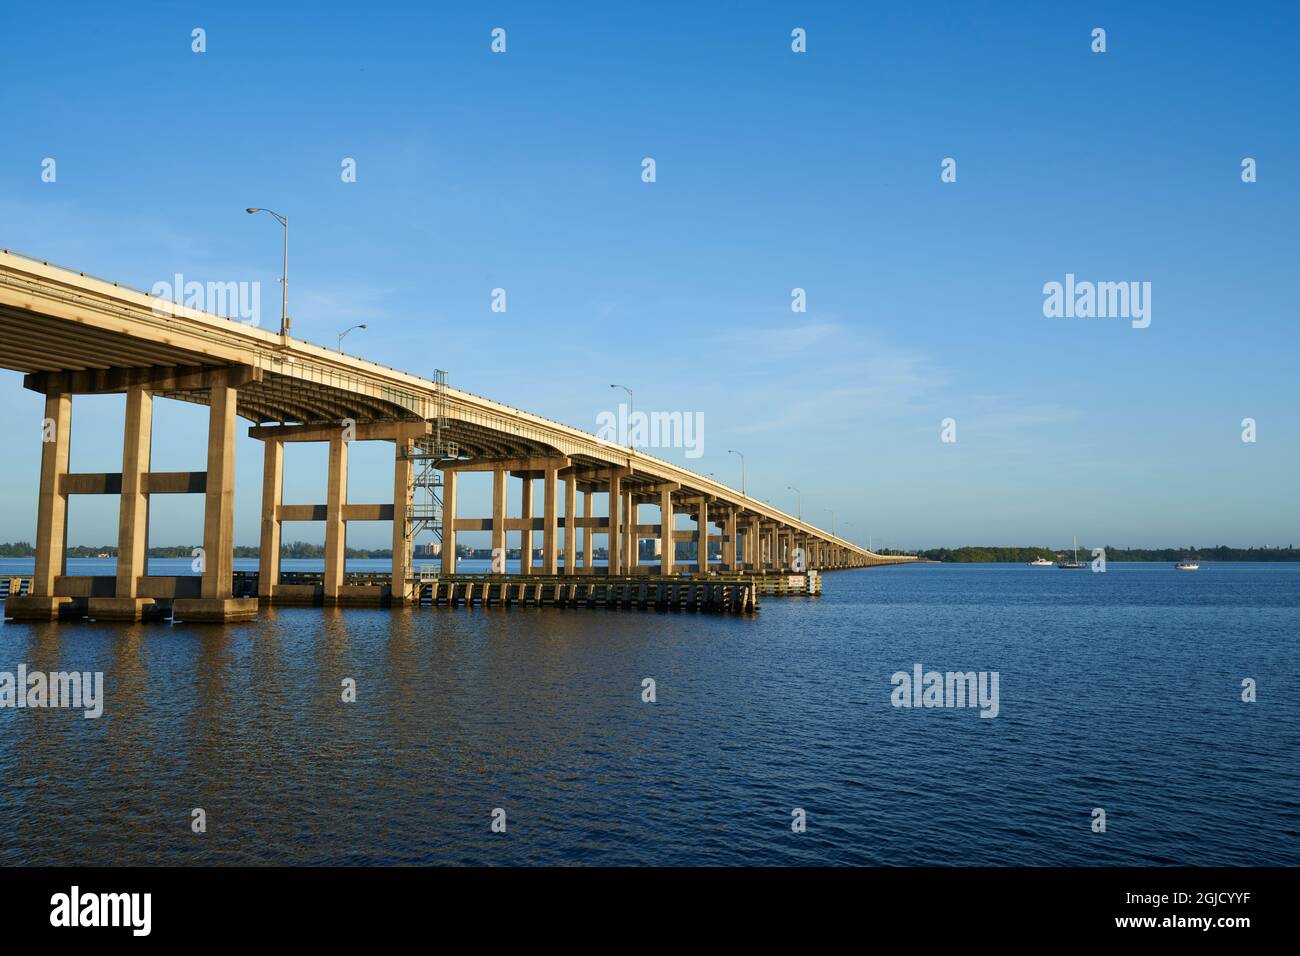 USA, Florida, Fort Myers. The Cleveland Avenue Bridge spans the Caloosahatchee River at Sunrise, connecting Fort Myers with North Fort Myers. Stock Photo